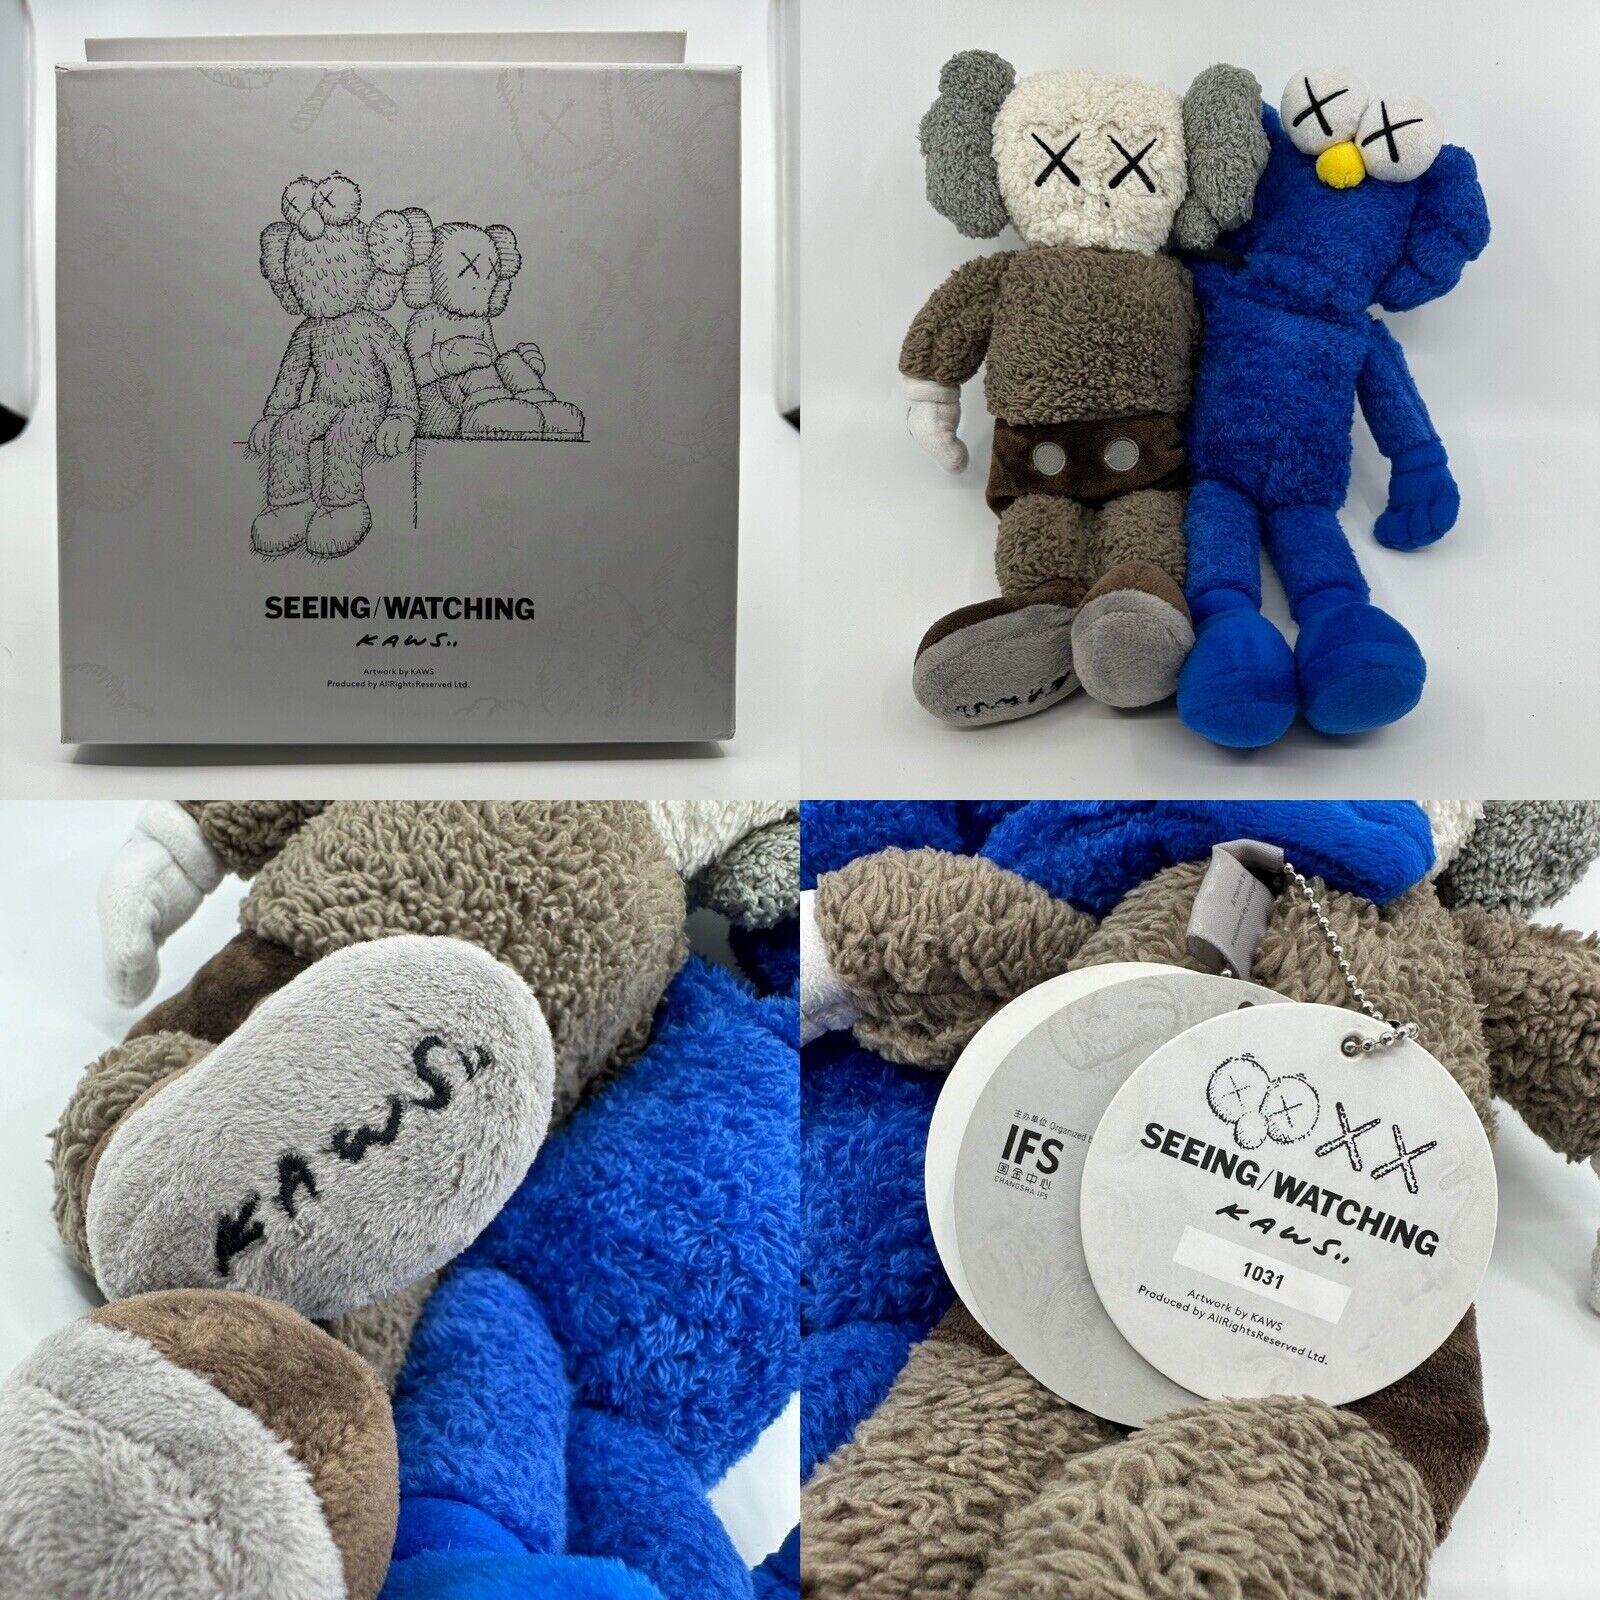 KAWS Seeing / Watching 16” BFF Companion Plush #1031 Compete With Box